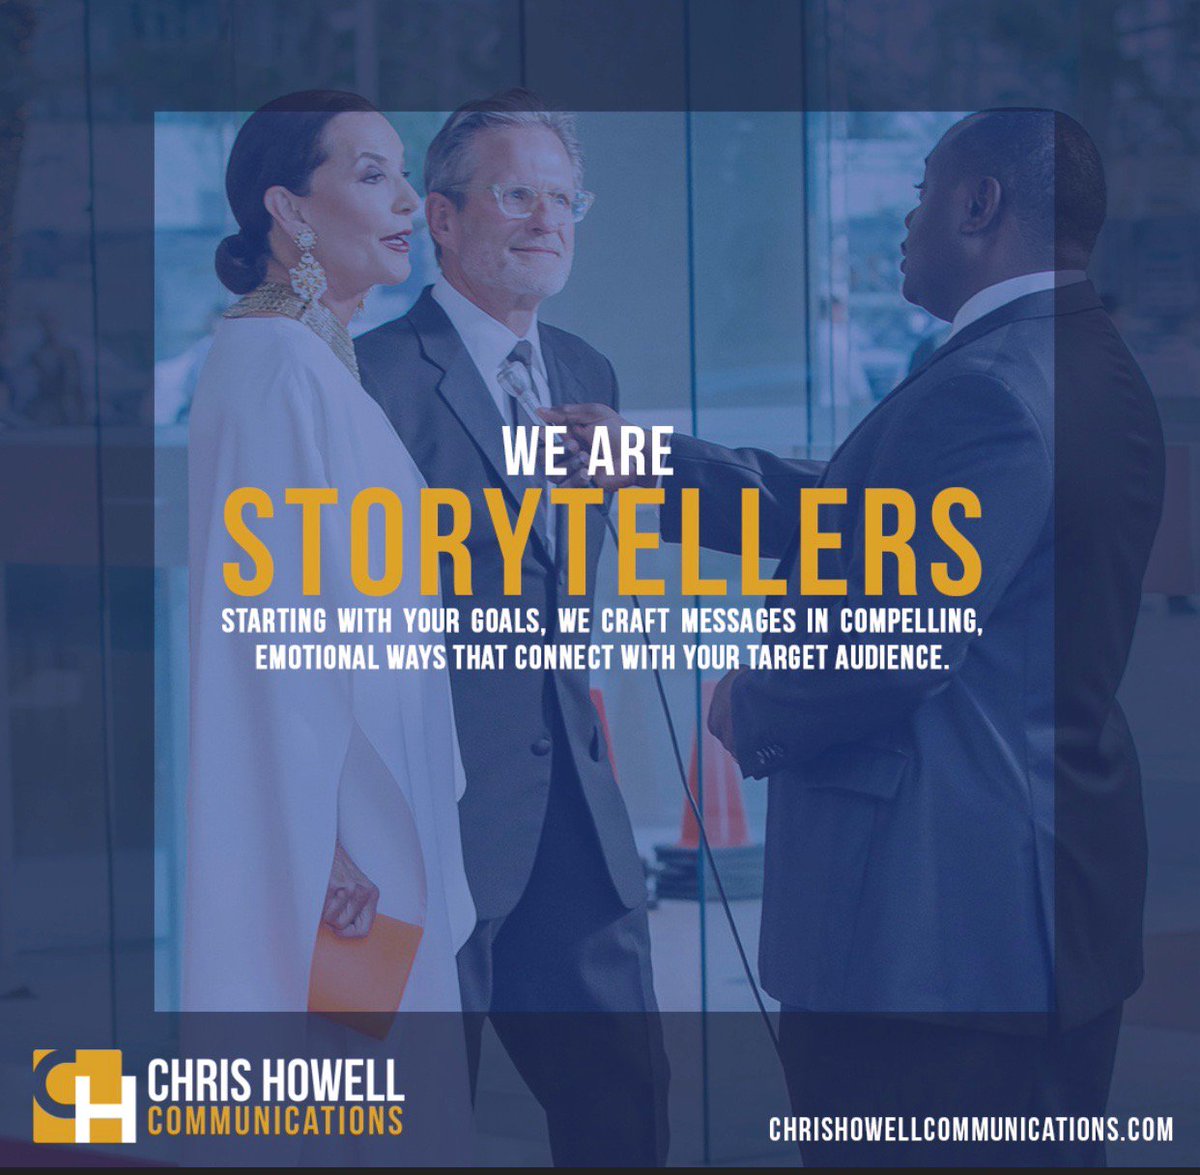 The most important part of your story is how YOU tell it. We can help! #wearestorytellers #chrishowellcommunications